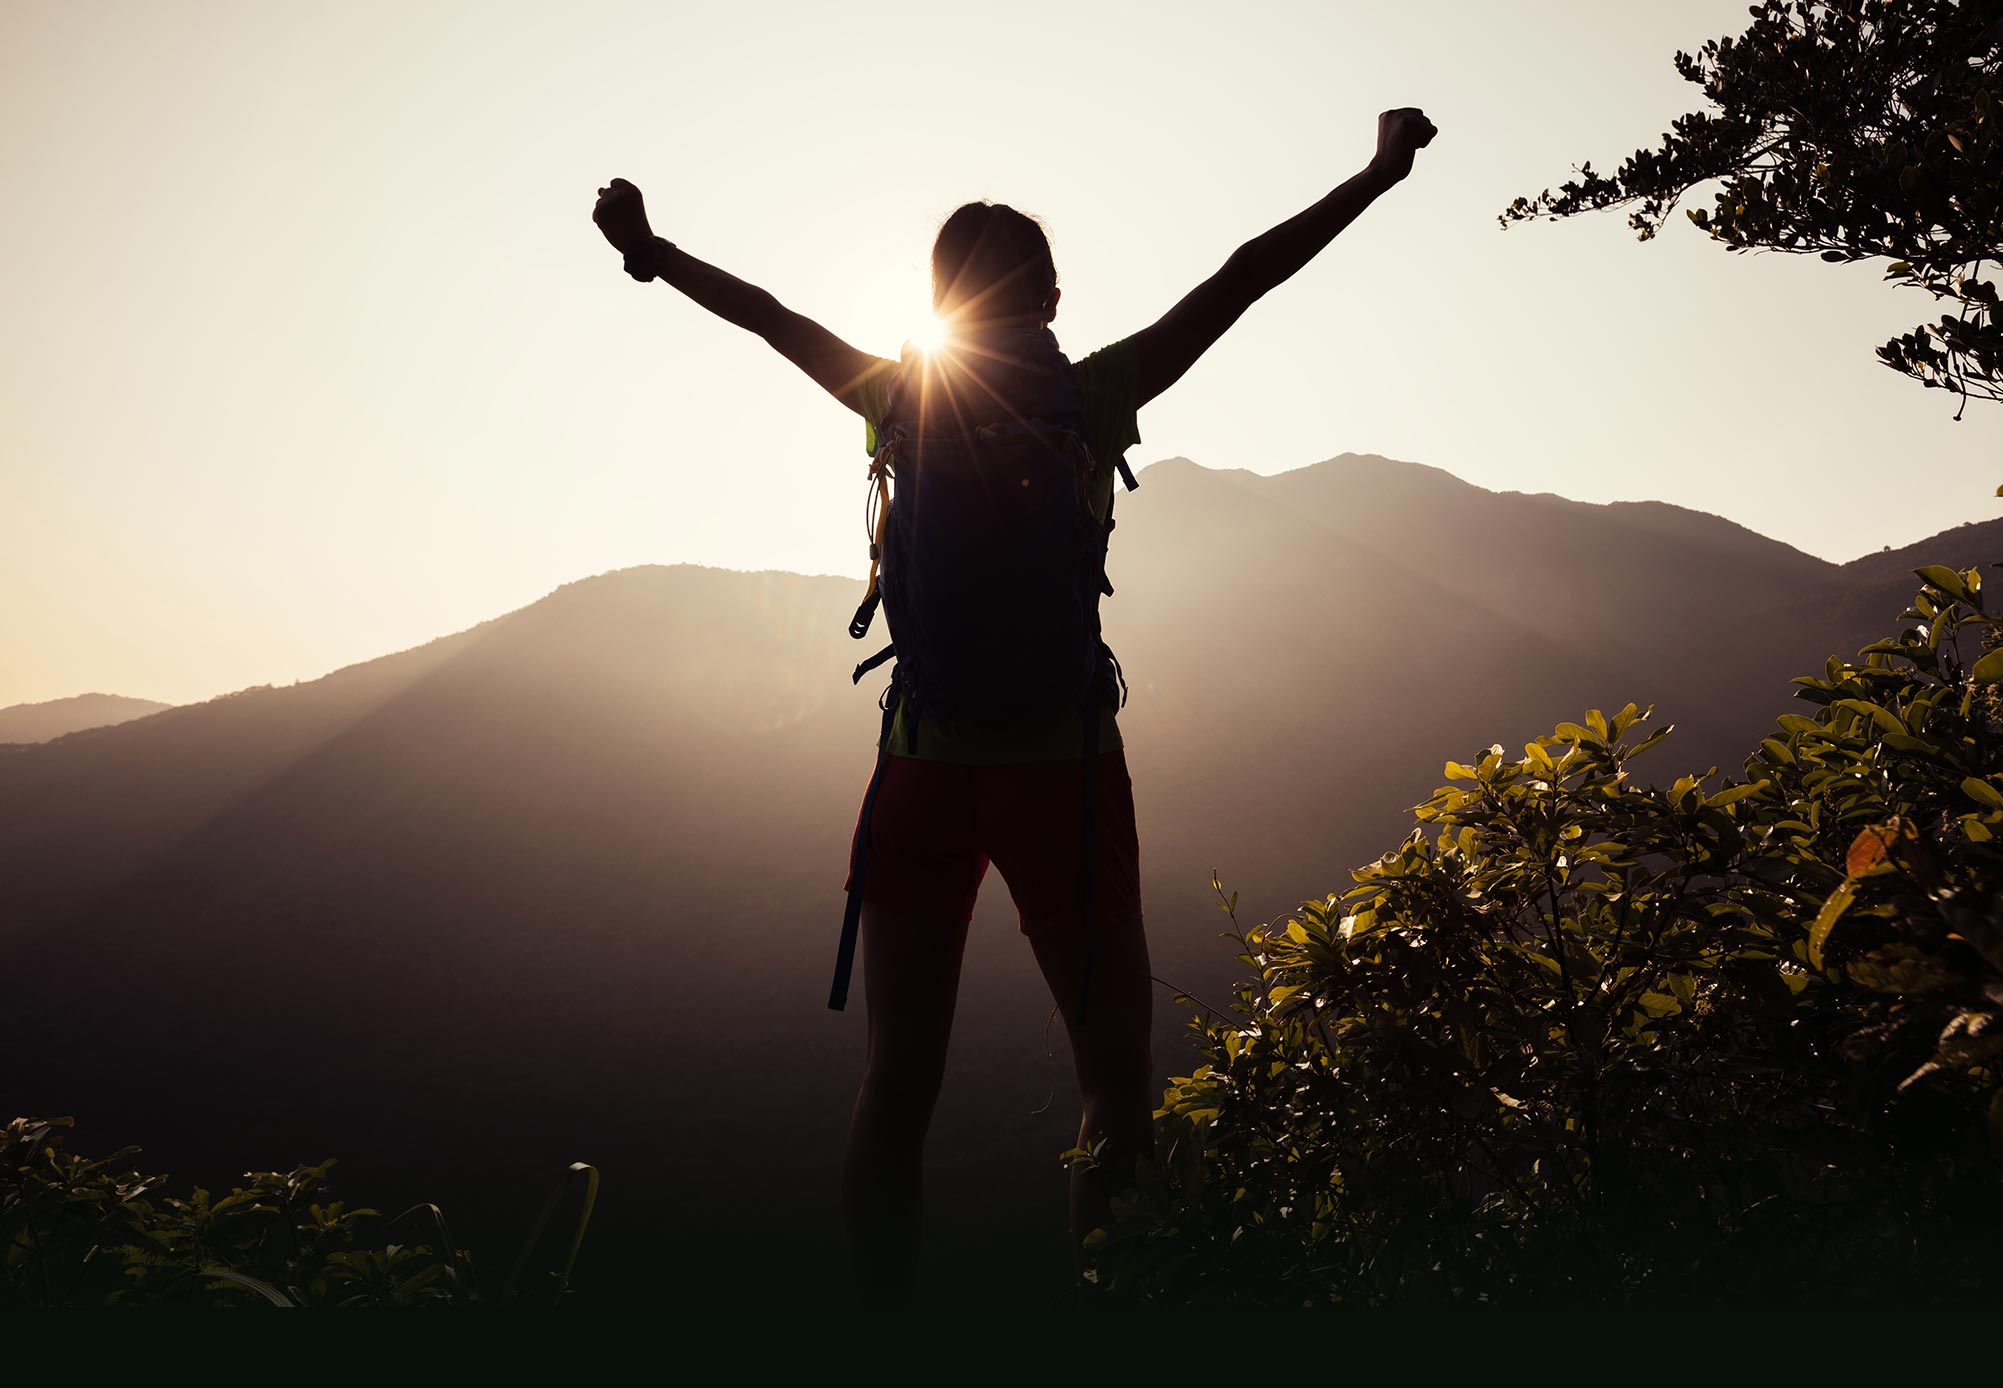 Person with arms raised silhouetted against setting sun and mountain peak